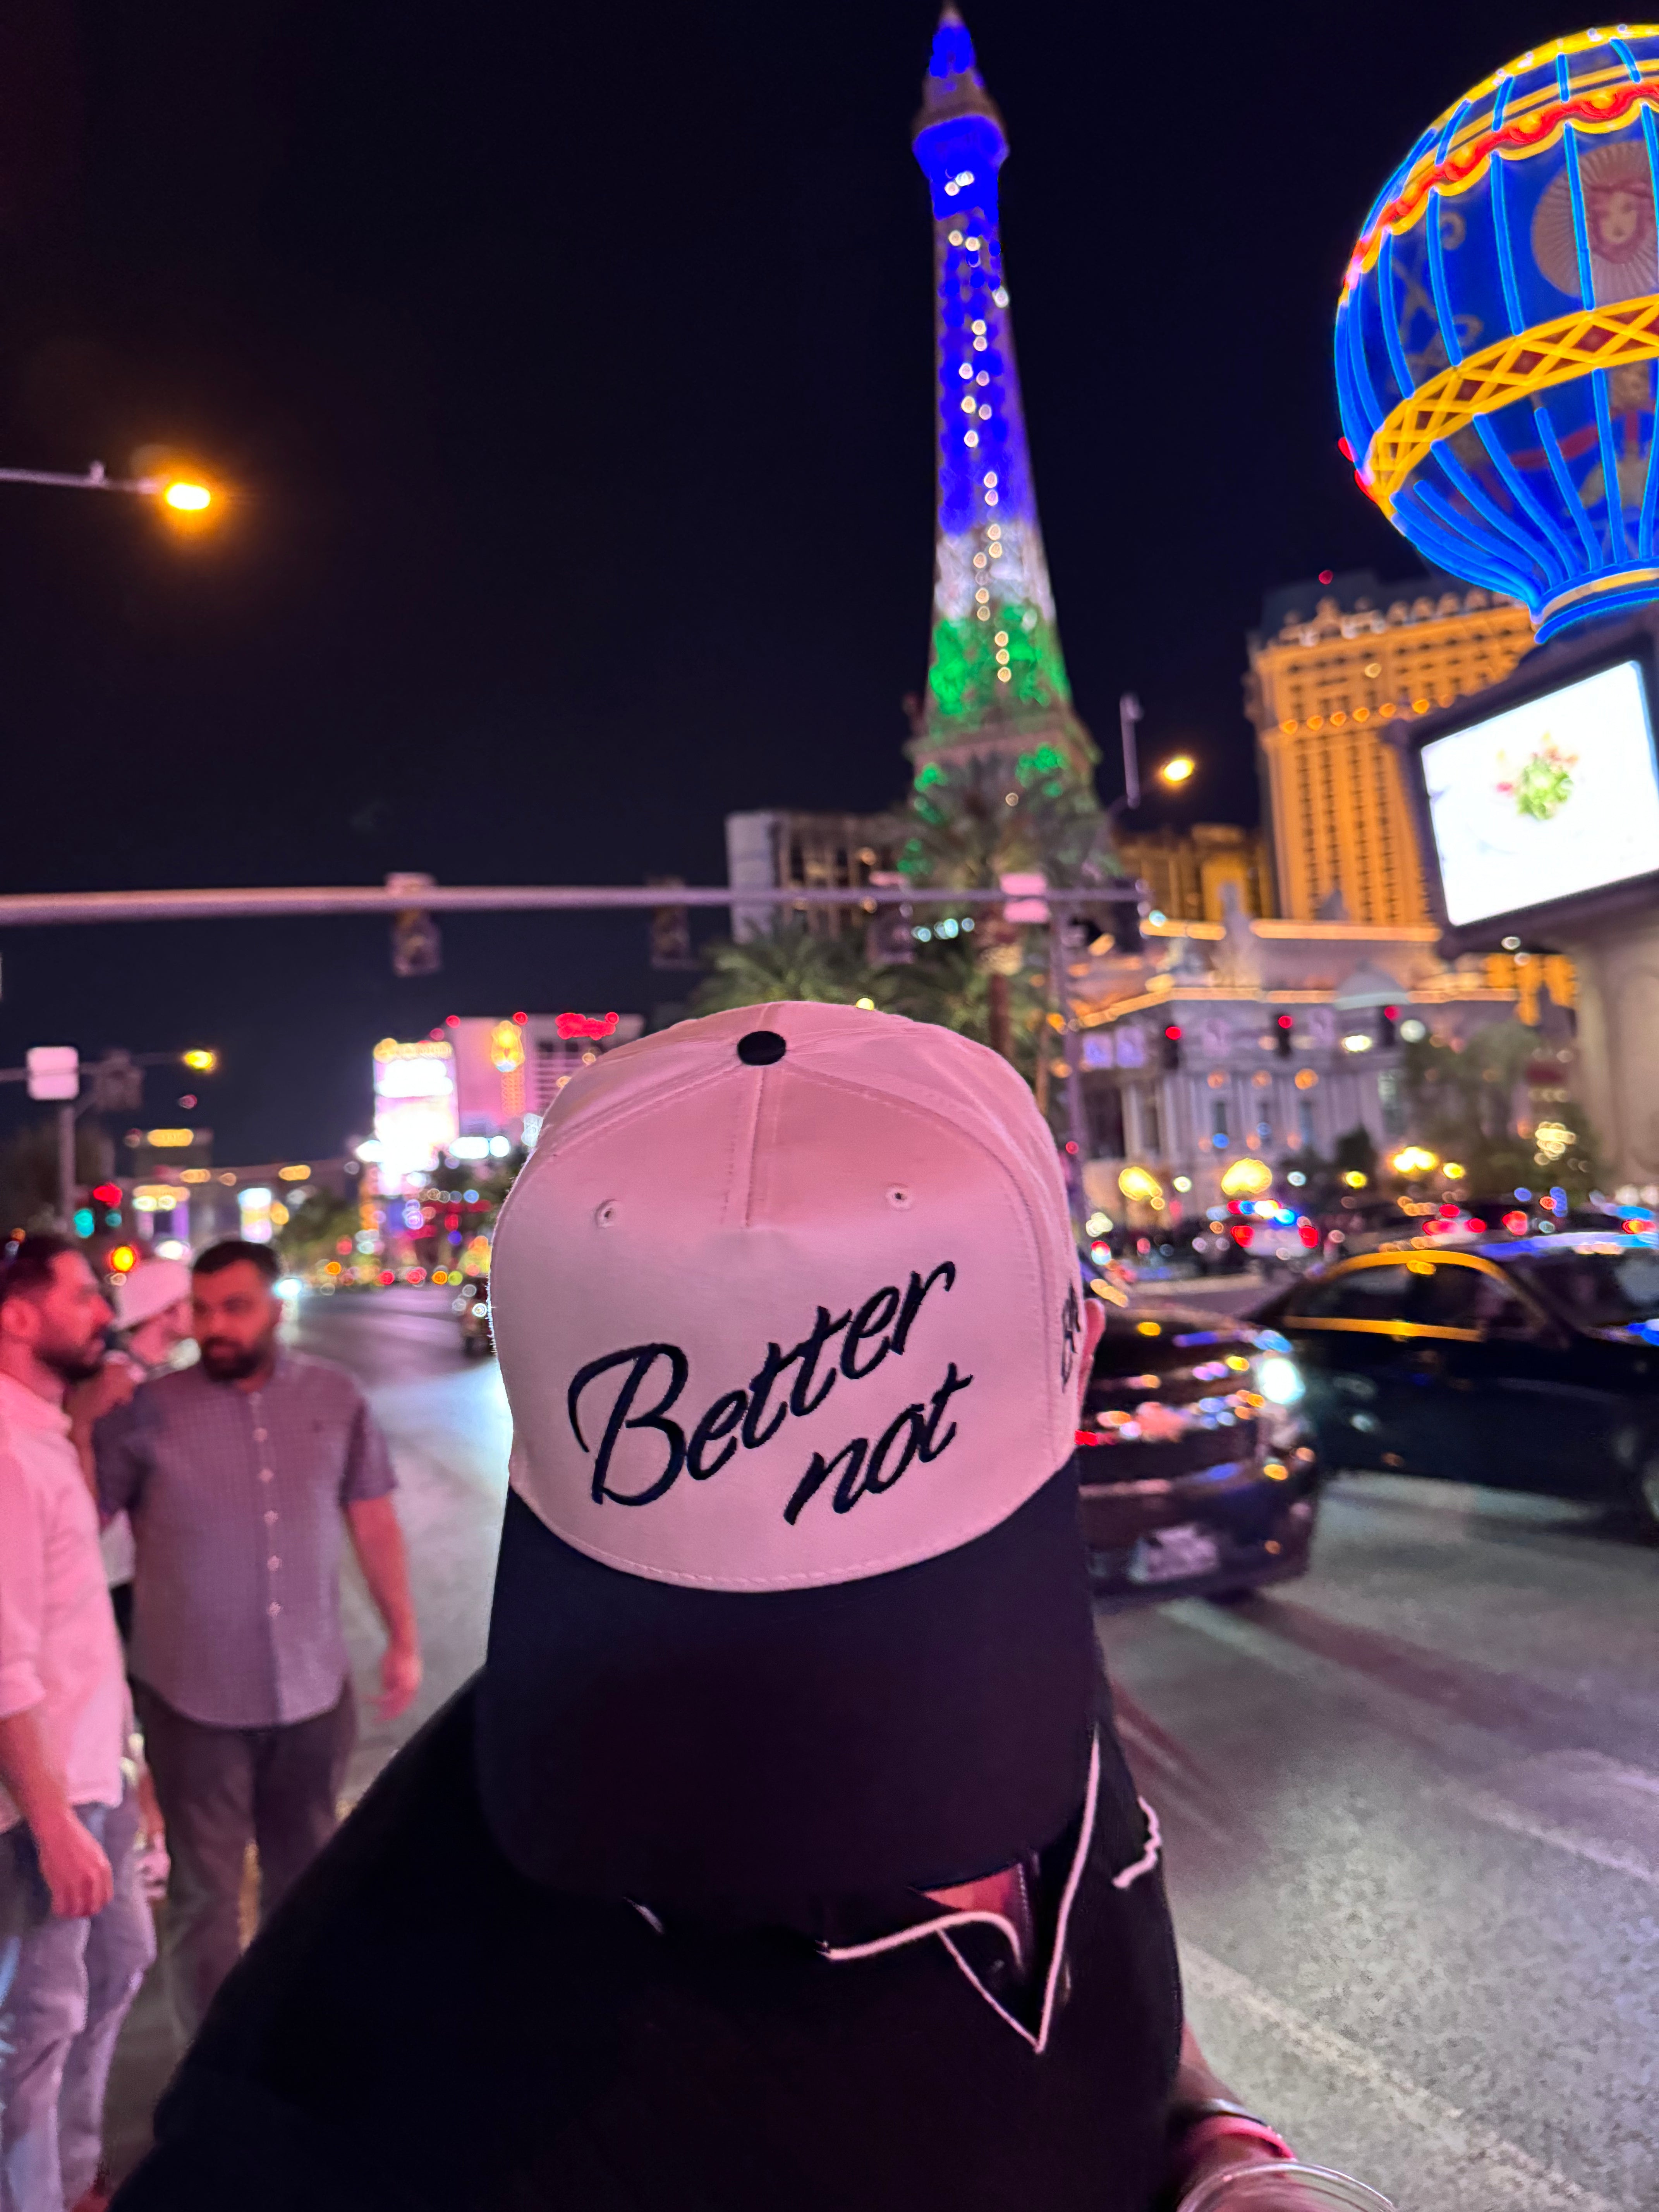 A person wearing The Classic by Better not with the phrase "Better not" embroidered on it stands in front of a replica of the Eiffel Tower and neon signs in a bustling city at night.